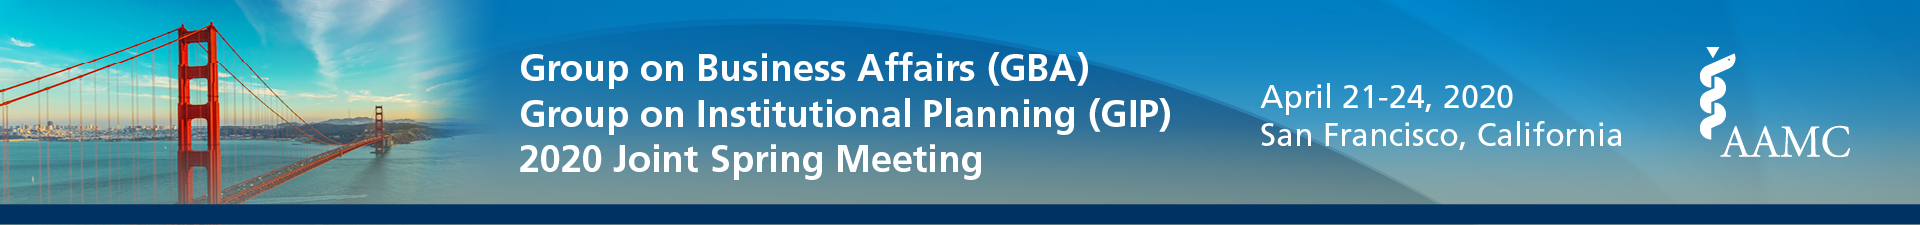 2022 Group on Business Affairs (GBA), Group on Institutional Planning (GIP) Event Banner